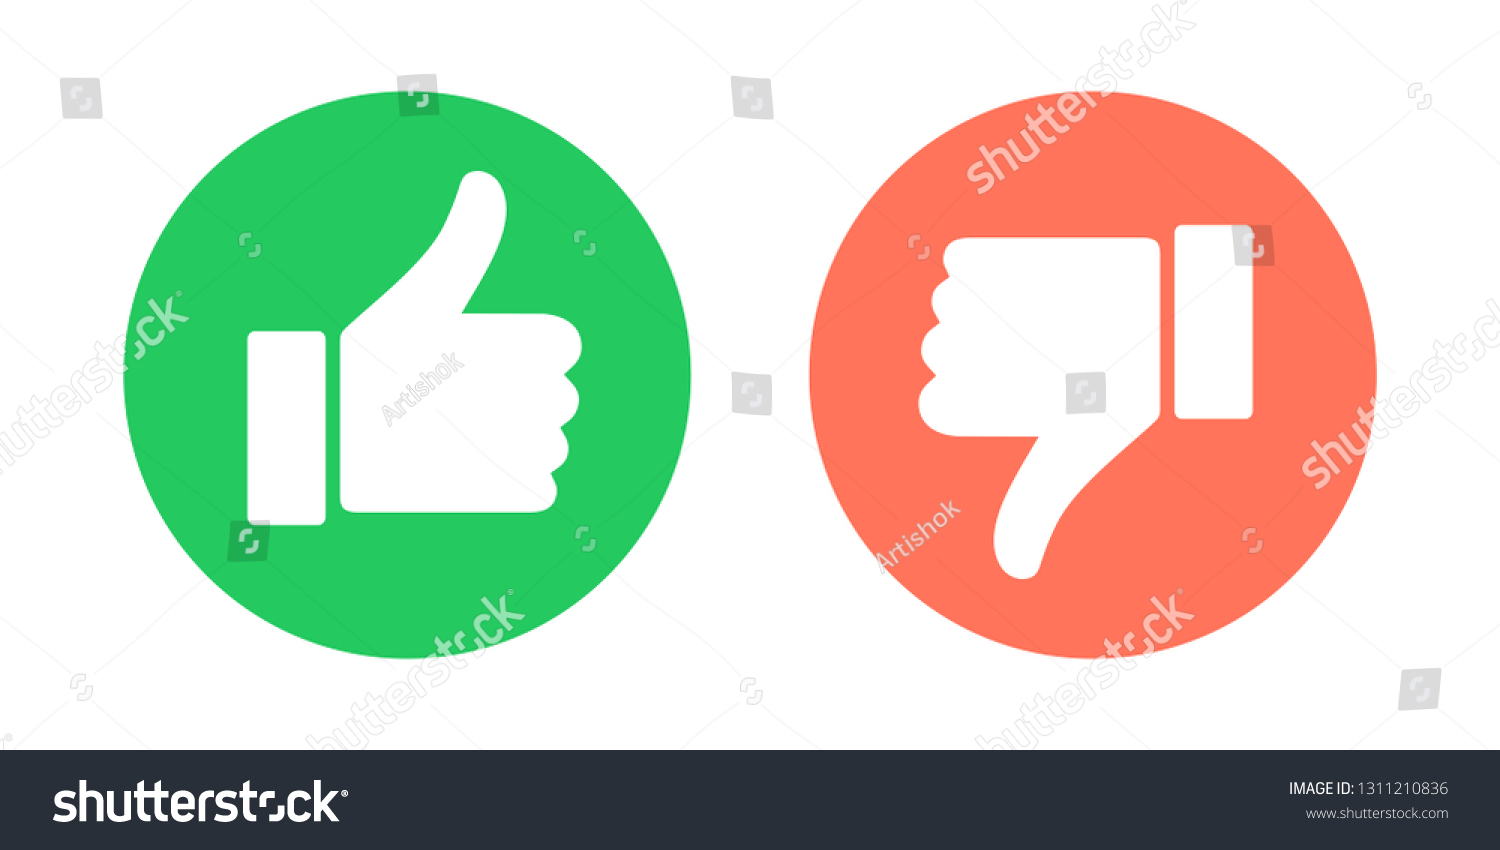 Do Dont Symbols Thumbs Thumbs Down Stock Illustration 1311210836